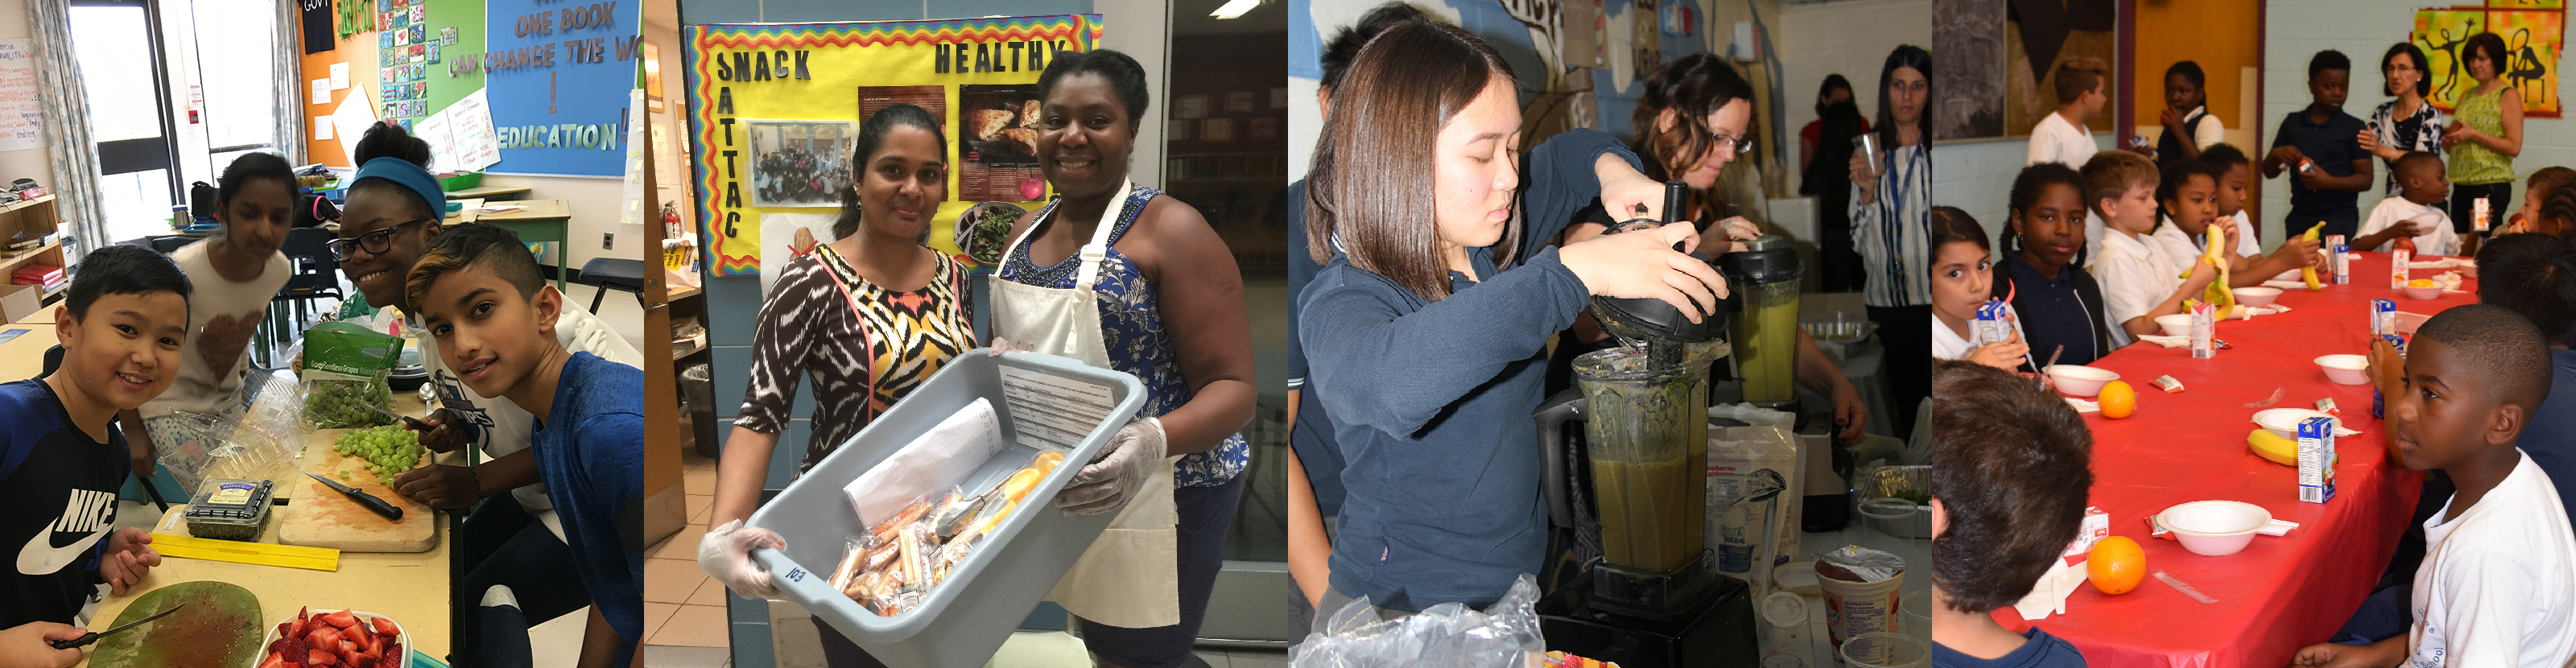 First photo is of students preparing various fruits to serve for breakfast. Second photo is of two nutrition program volunteers with a tub of food. Third photo is of students and staff preparing smoothies to serve. Fourth photo is of a group of students around a table eating breakfast together.